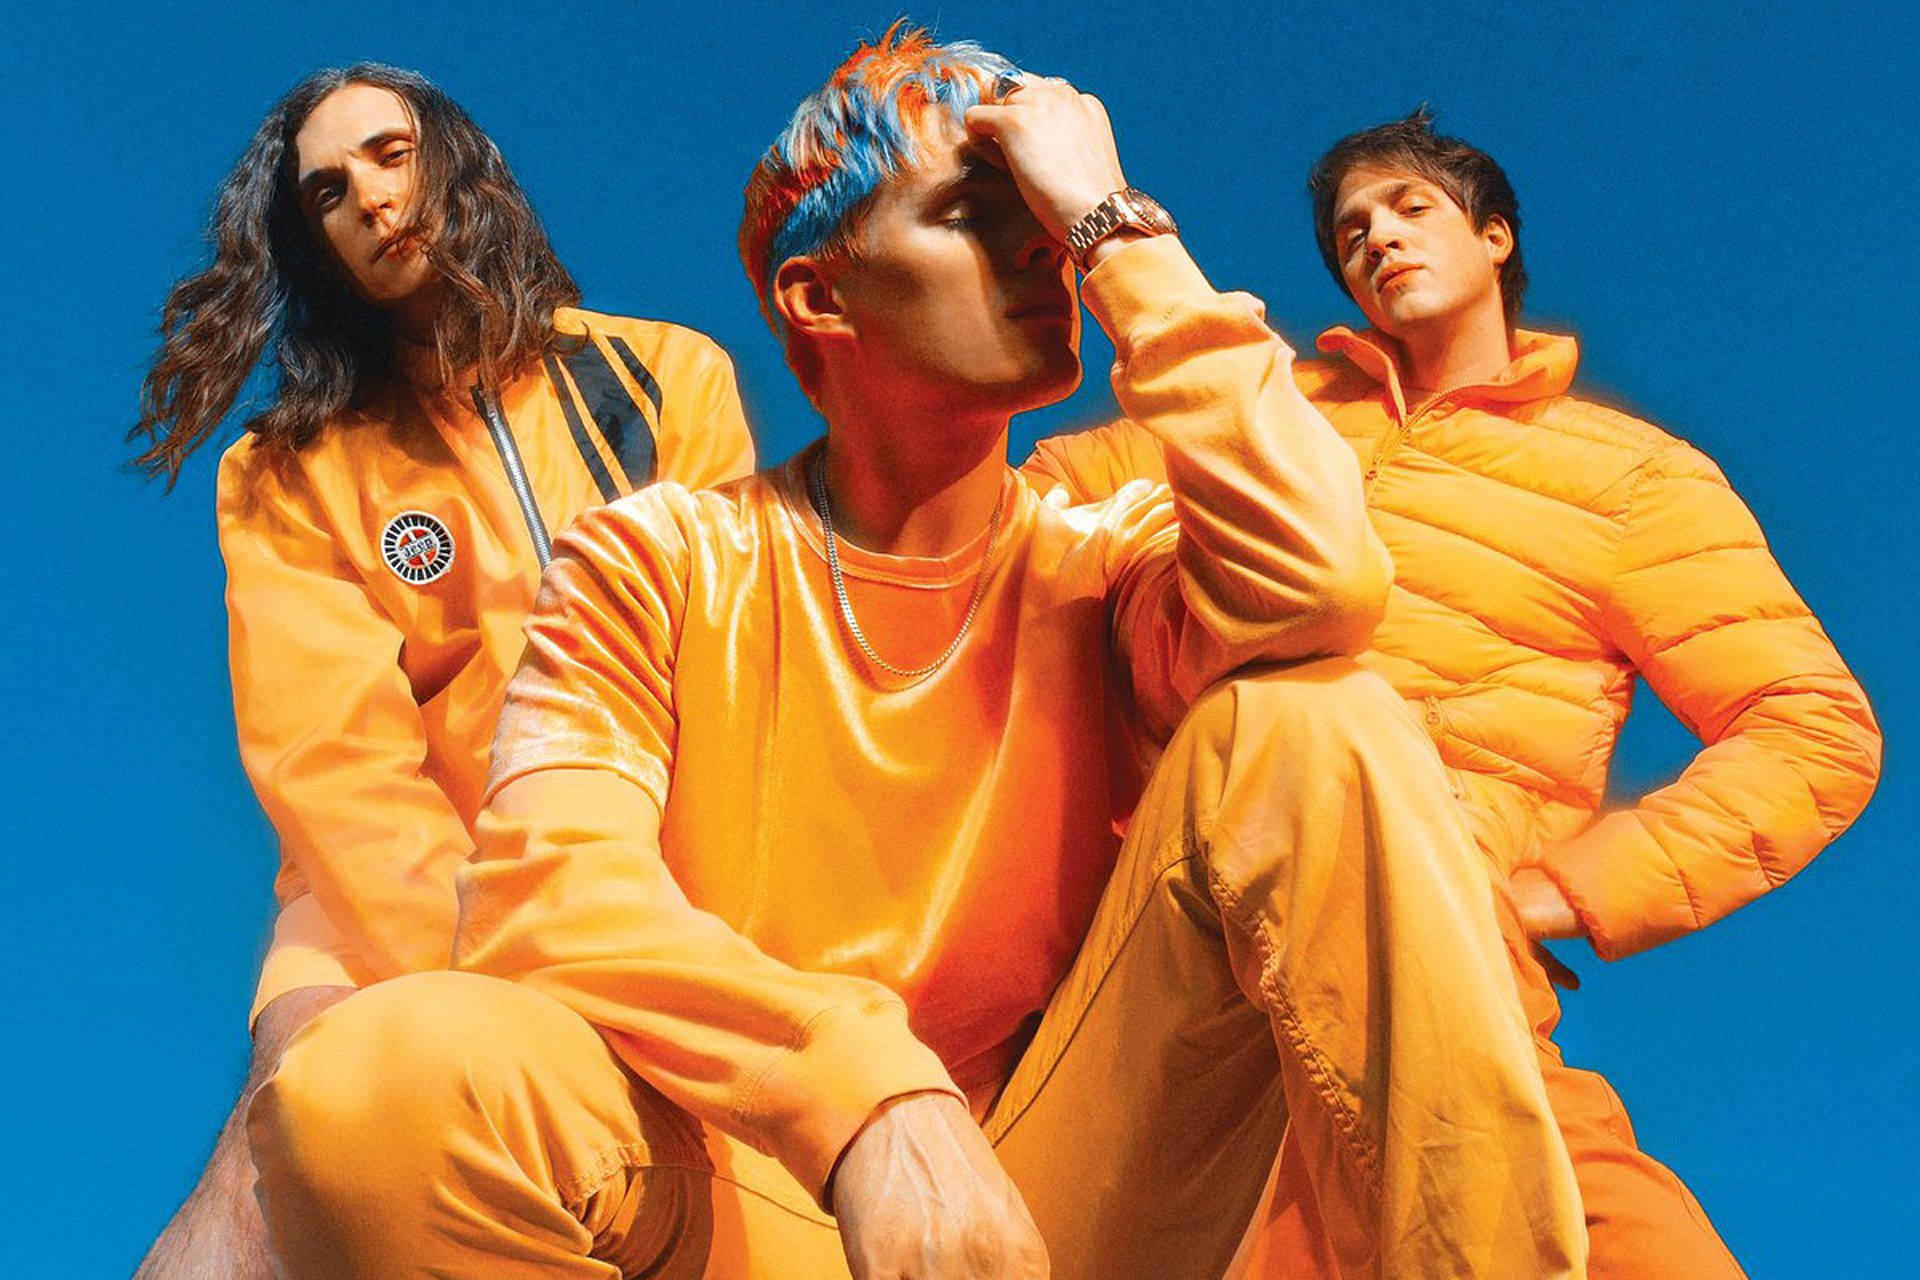 Waterparks Release New Album - 'Greatest Hits'